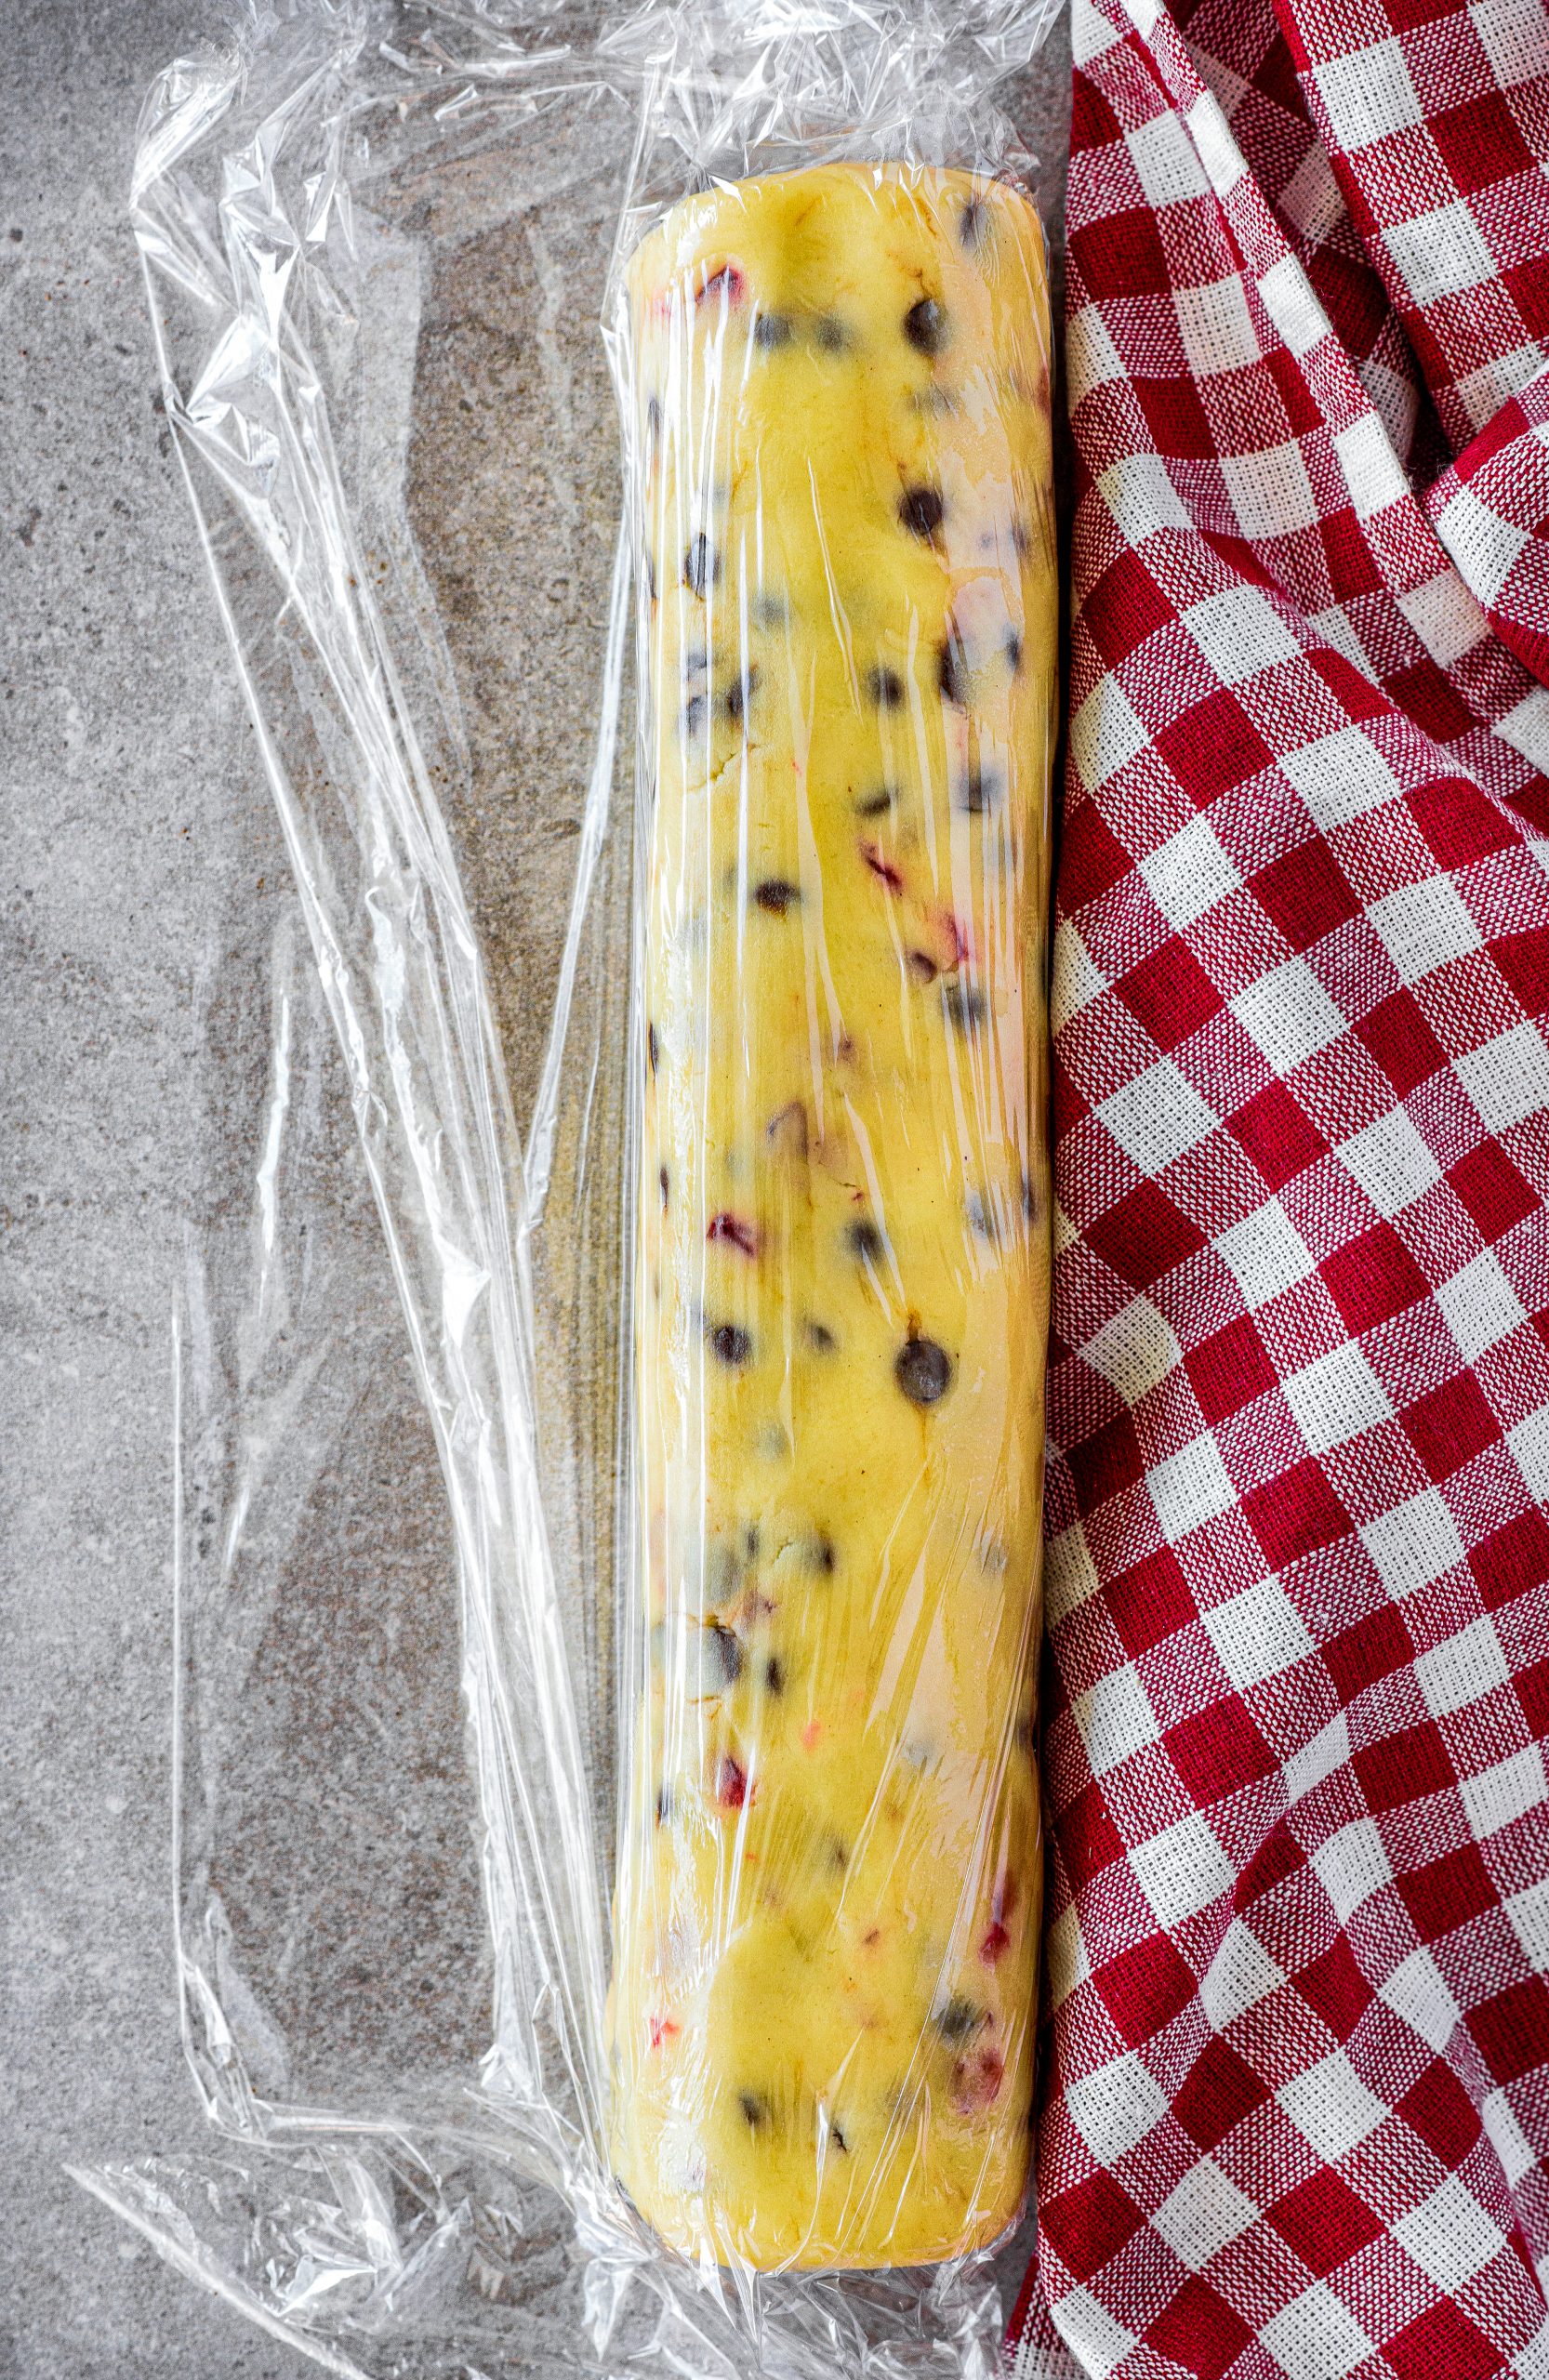 Form the dough into a log shape about 2 inches thick, and wrap in plastic wrap. 